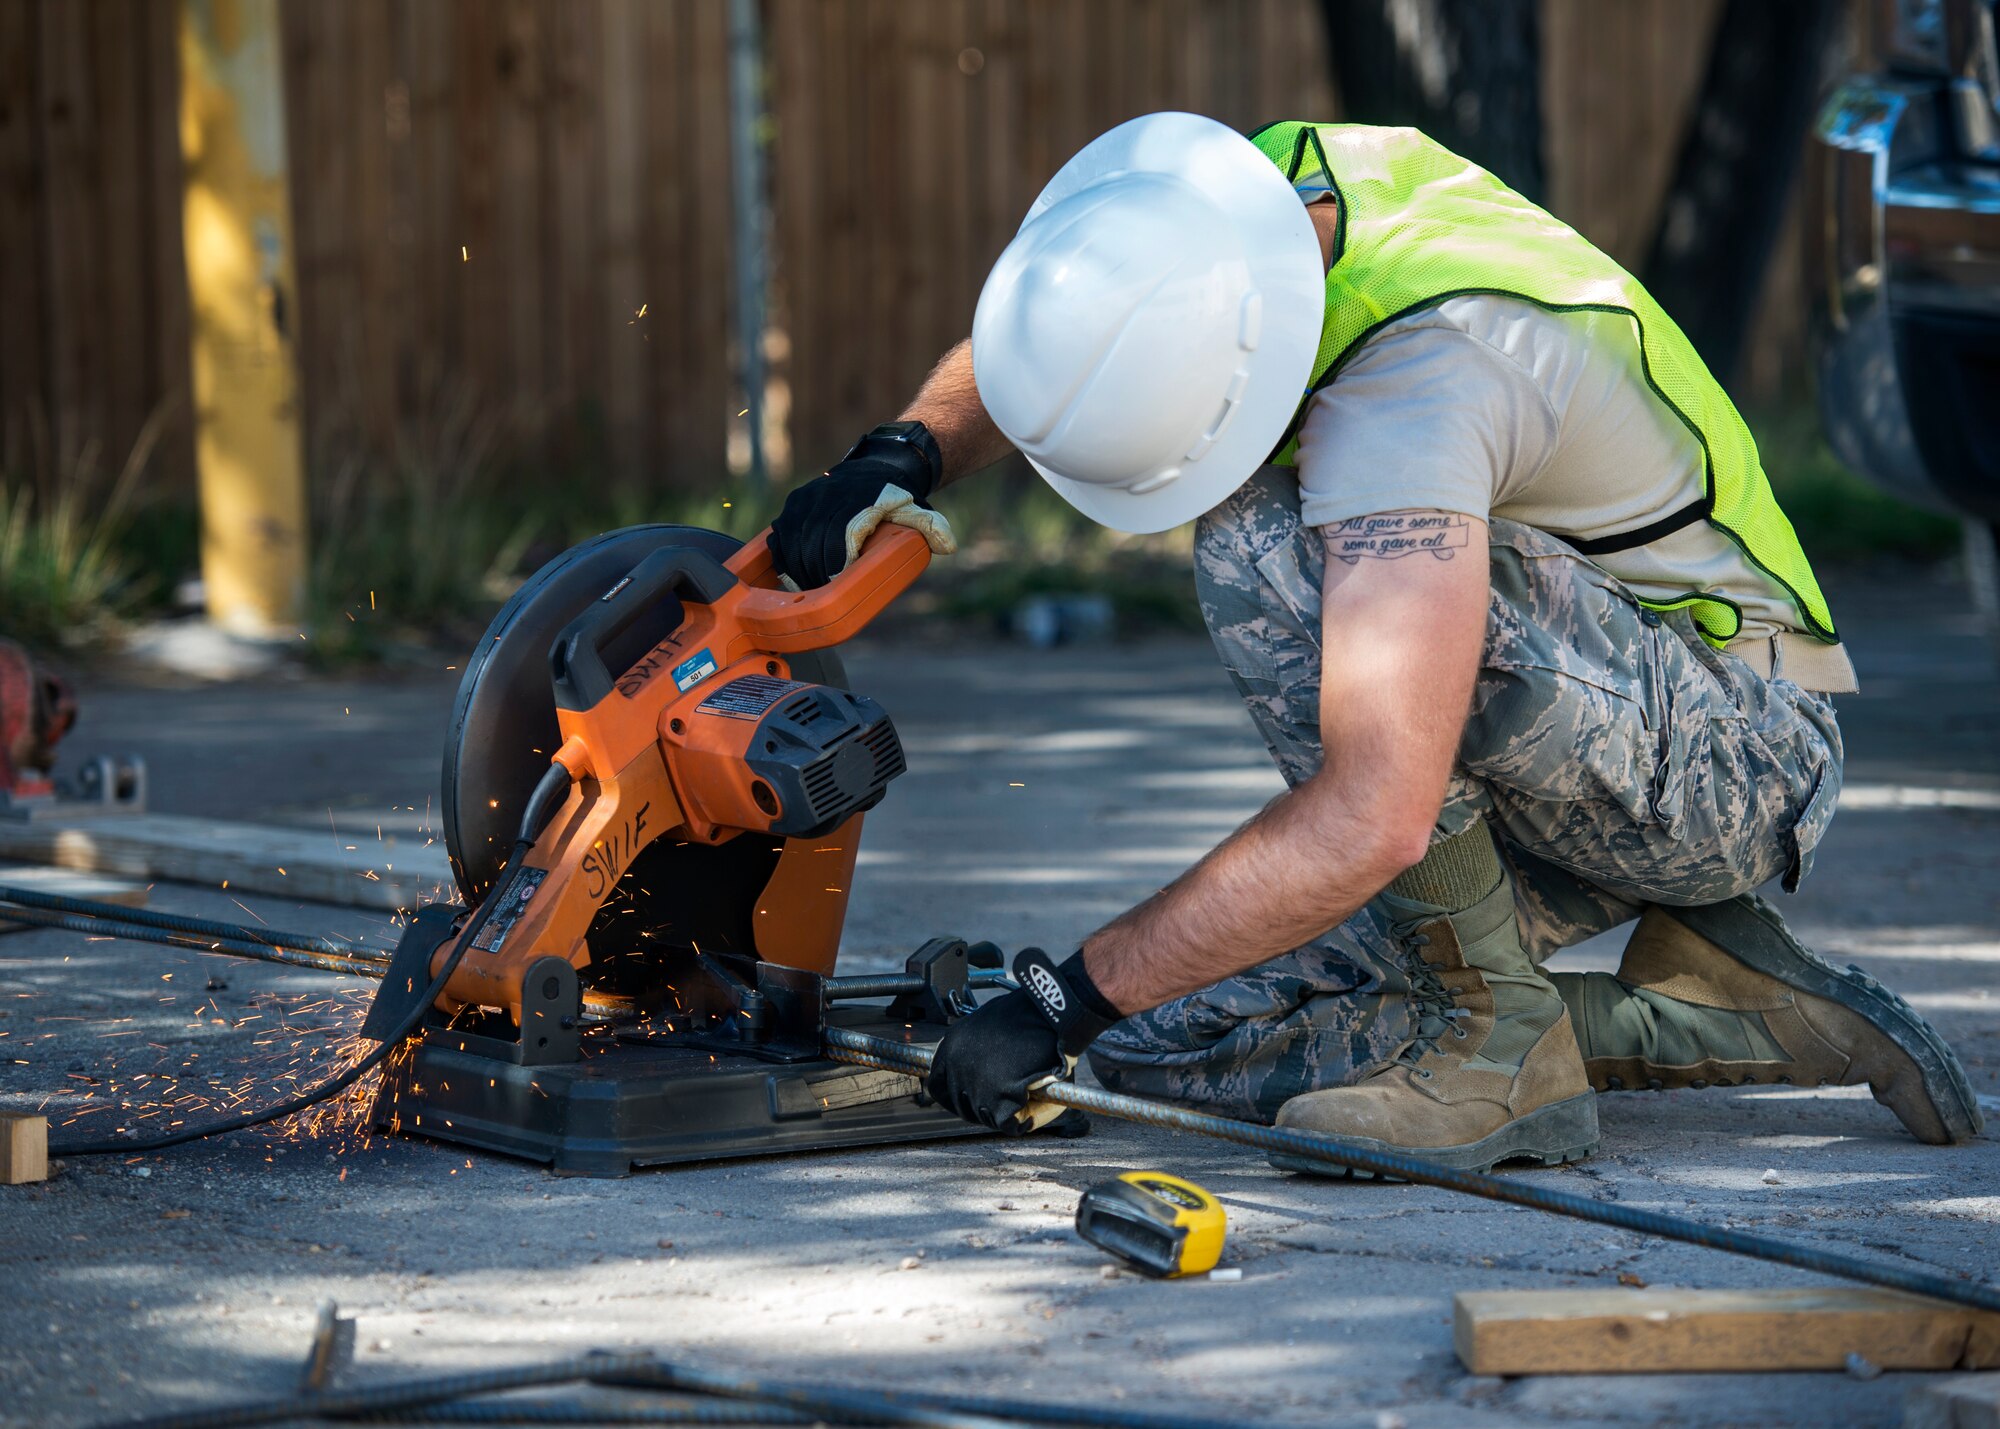 U.S. Air Force Airman 1st Class Keegan Geske, 133rd Civil Engineer Squadron Utilities shop, cuts a piece of rebar that will be used to reinforce a concrete footing on a handicap ramp for the St. Francis Catholic School in Gallup, N.M., July 24, 2018.